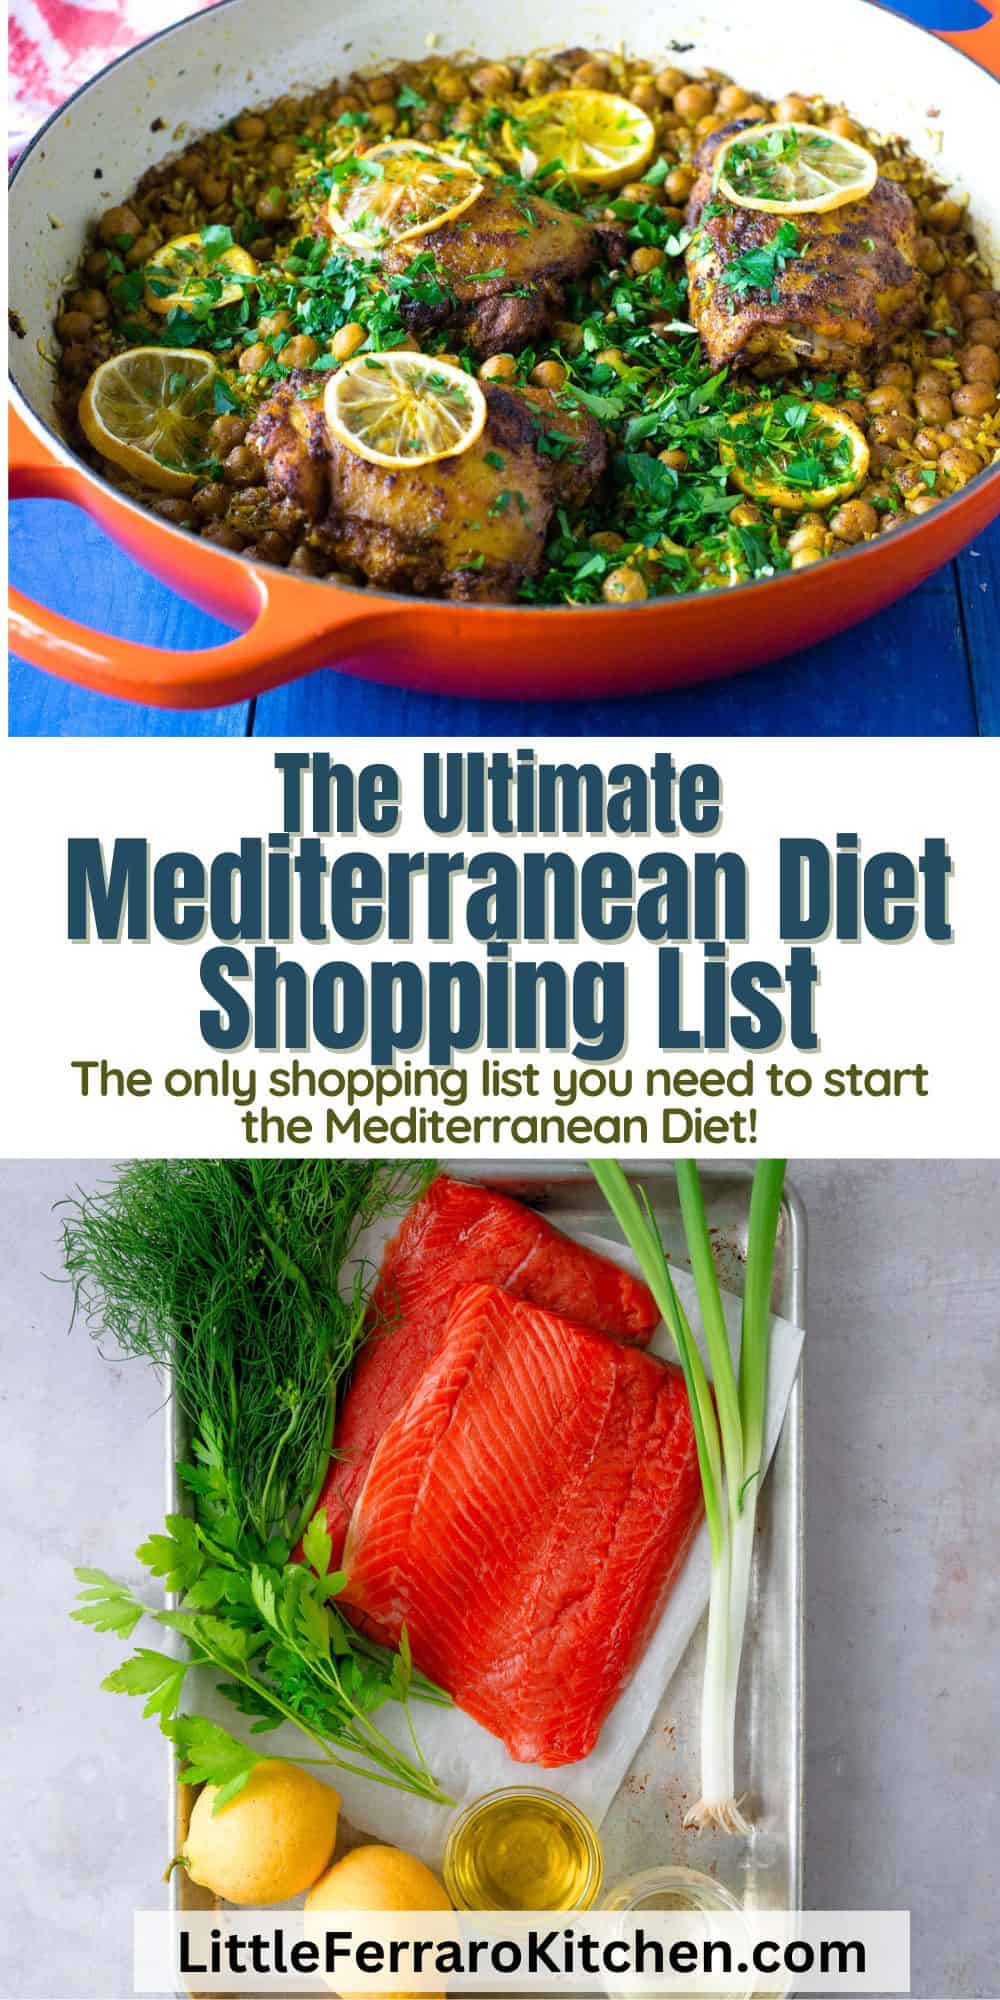 The ultimate Mediterranean Diet shopping list including a free printable PDF.